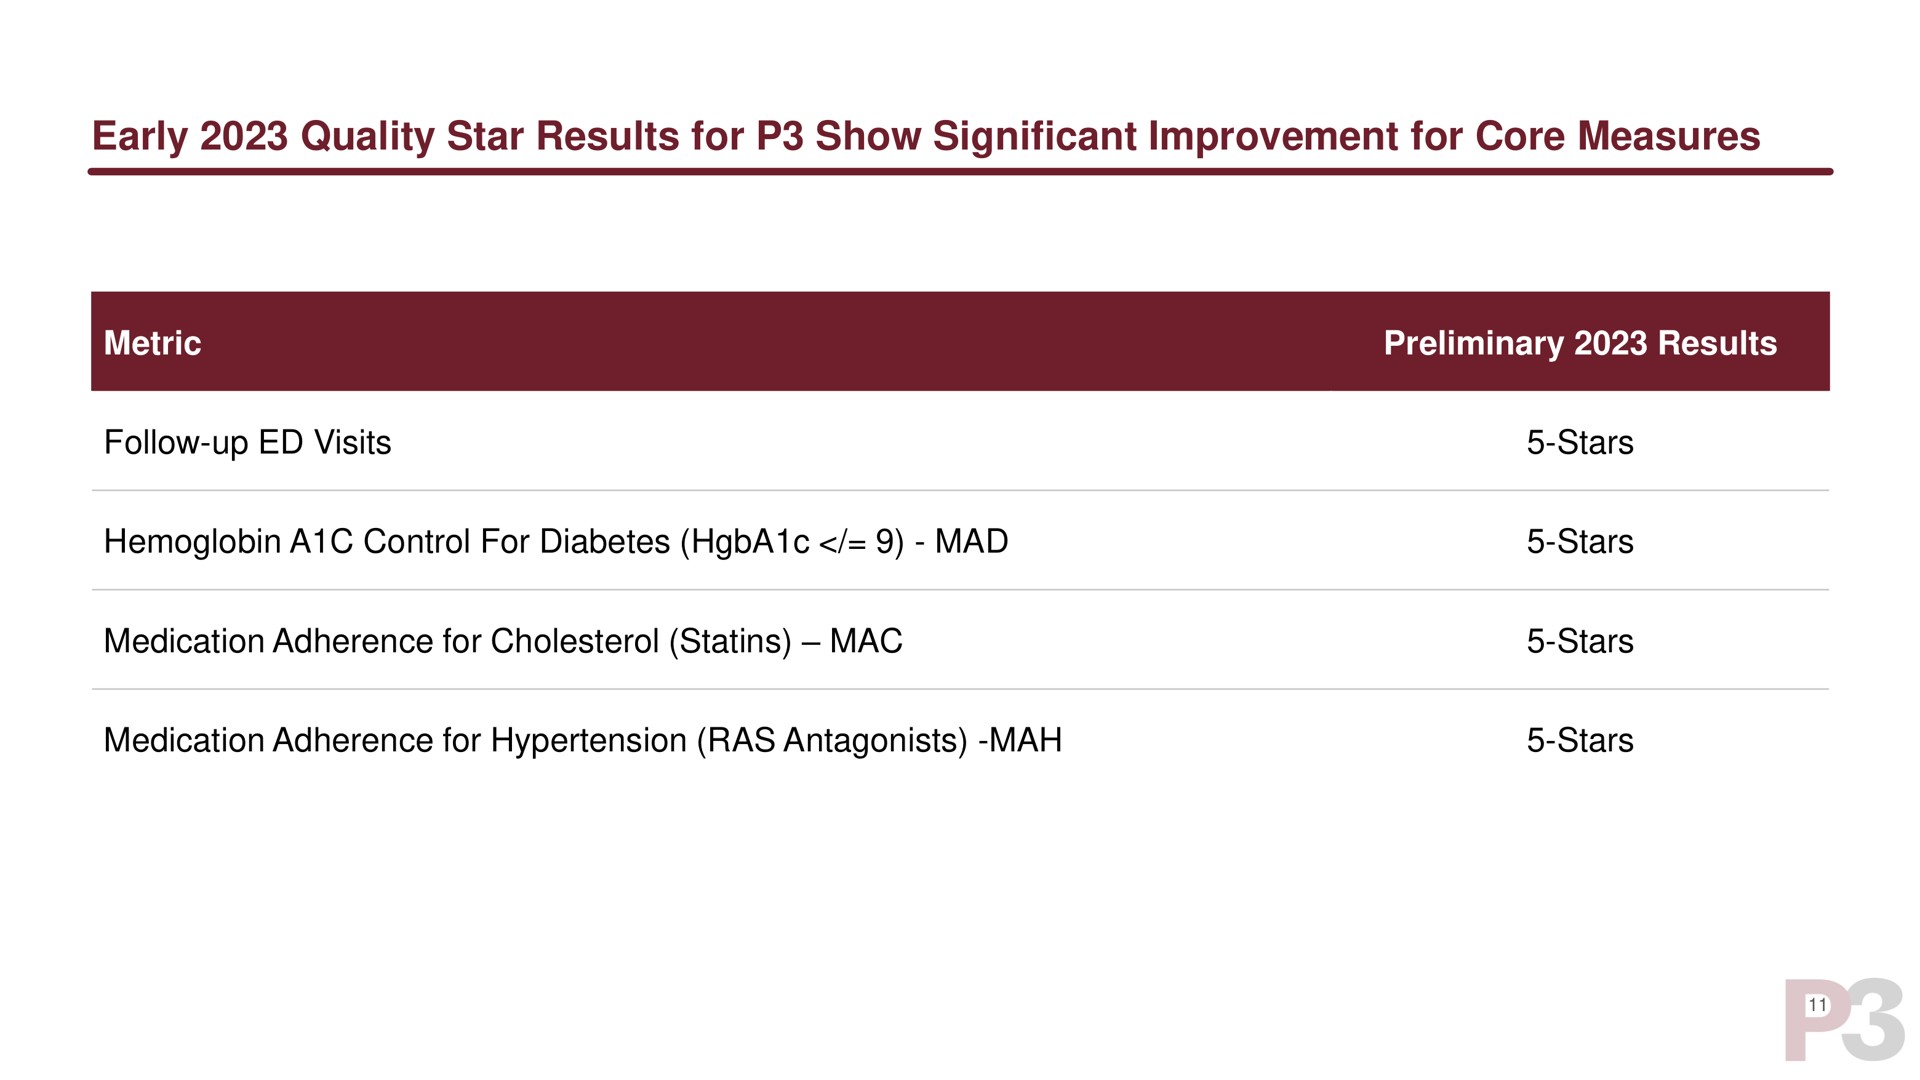 early quality star results for show significant improvement for core measures | P3 Health Partners